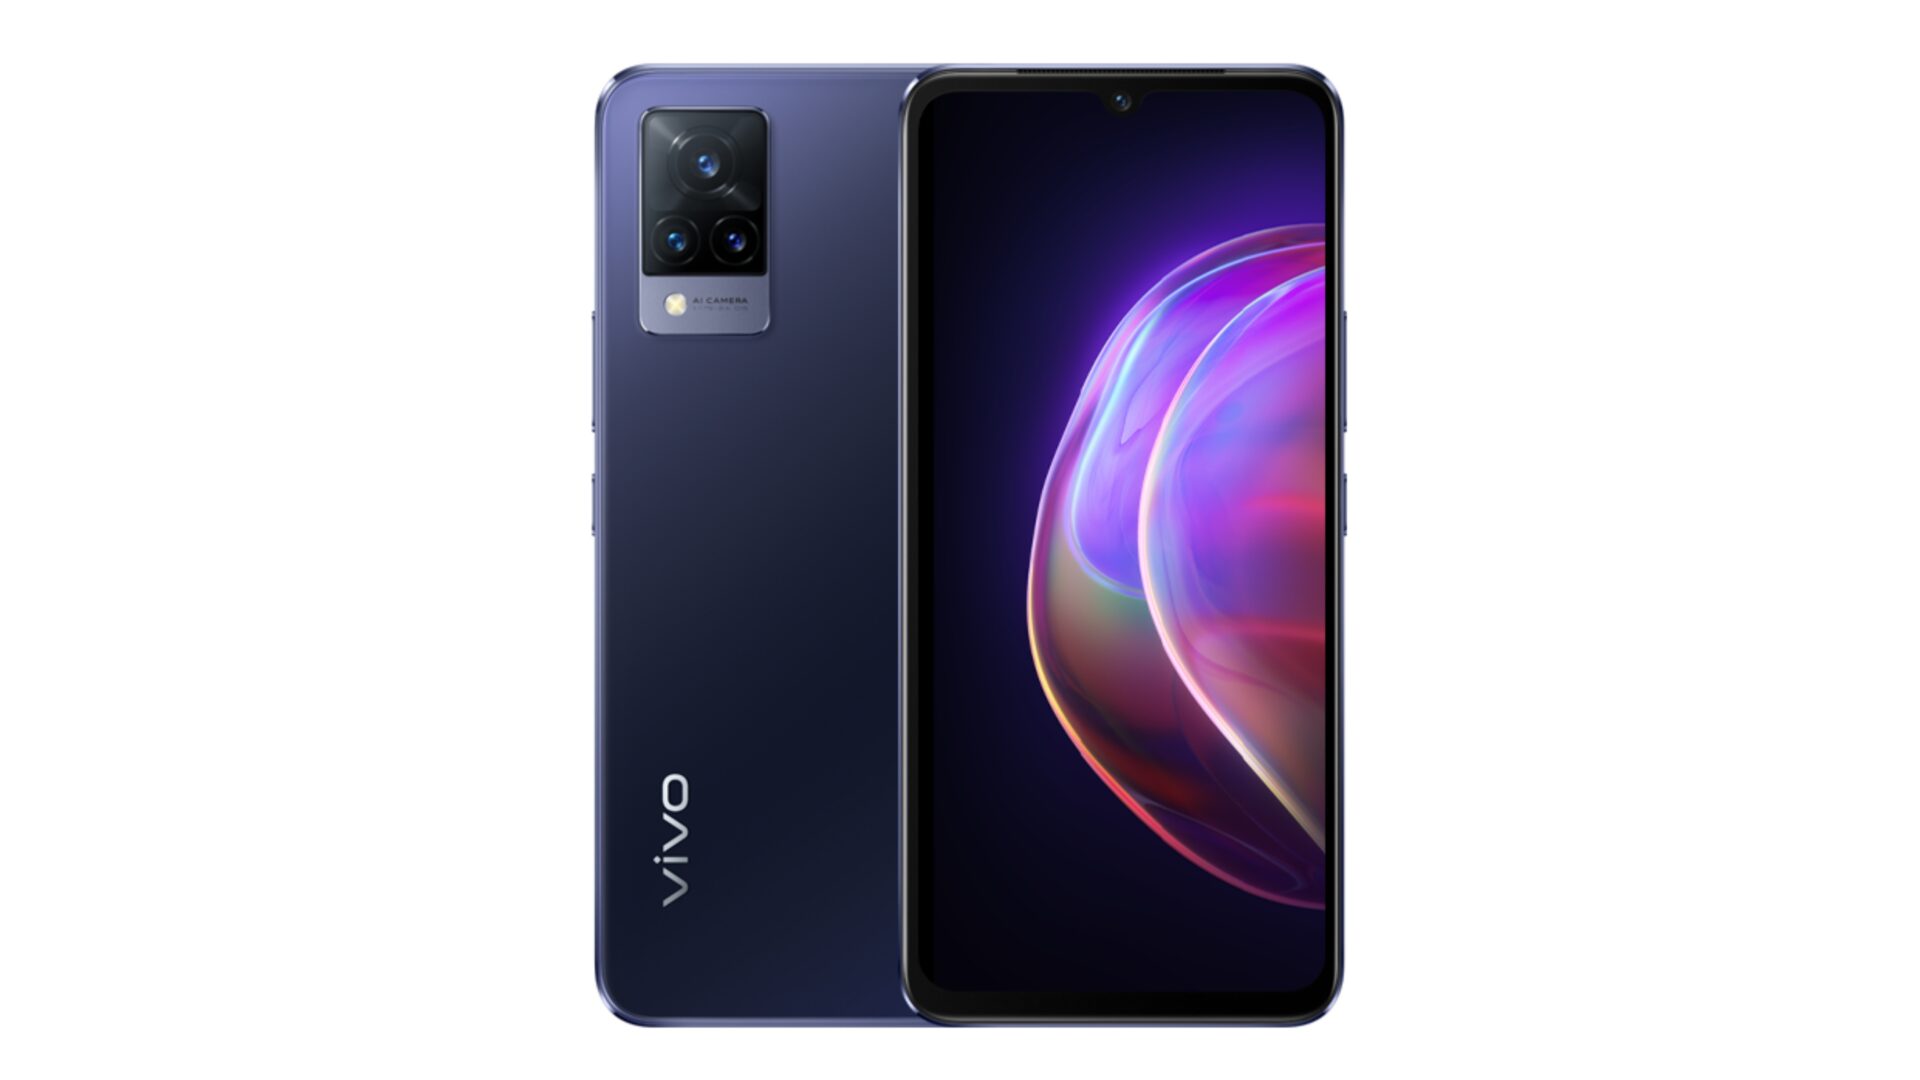 Vivo V21 5g Launched In India With 44mp Ois Selfie Camera And Dimensity 800u Soc Gizmochina 0551